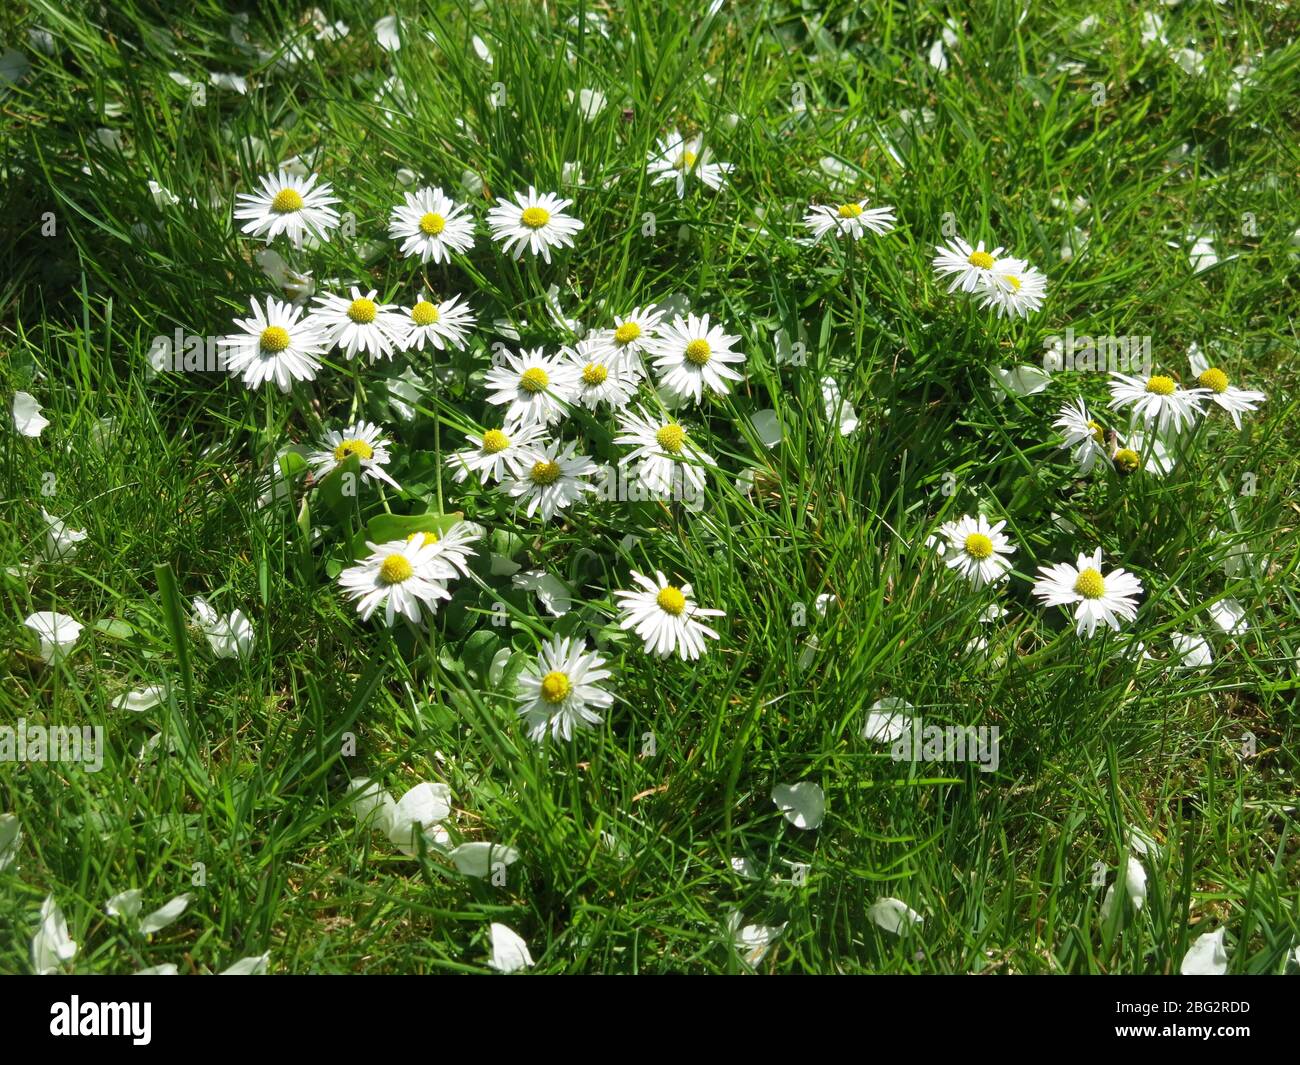 Any patch of grass in the English countryside may have a cluster of sunny white and yellow daisies; considered a weed if it grows in the garden lawn. Stock Photo